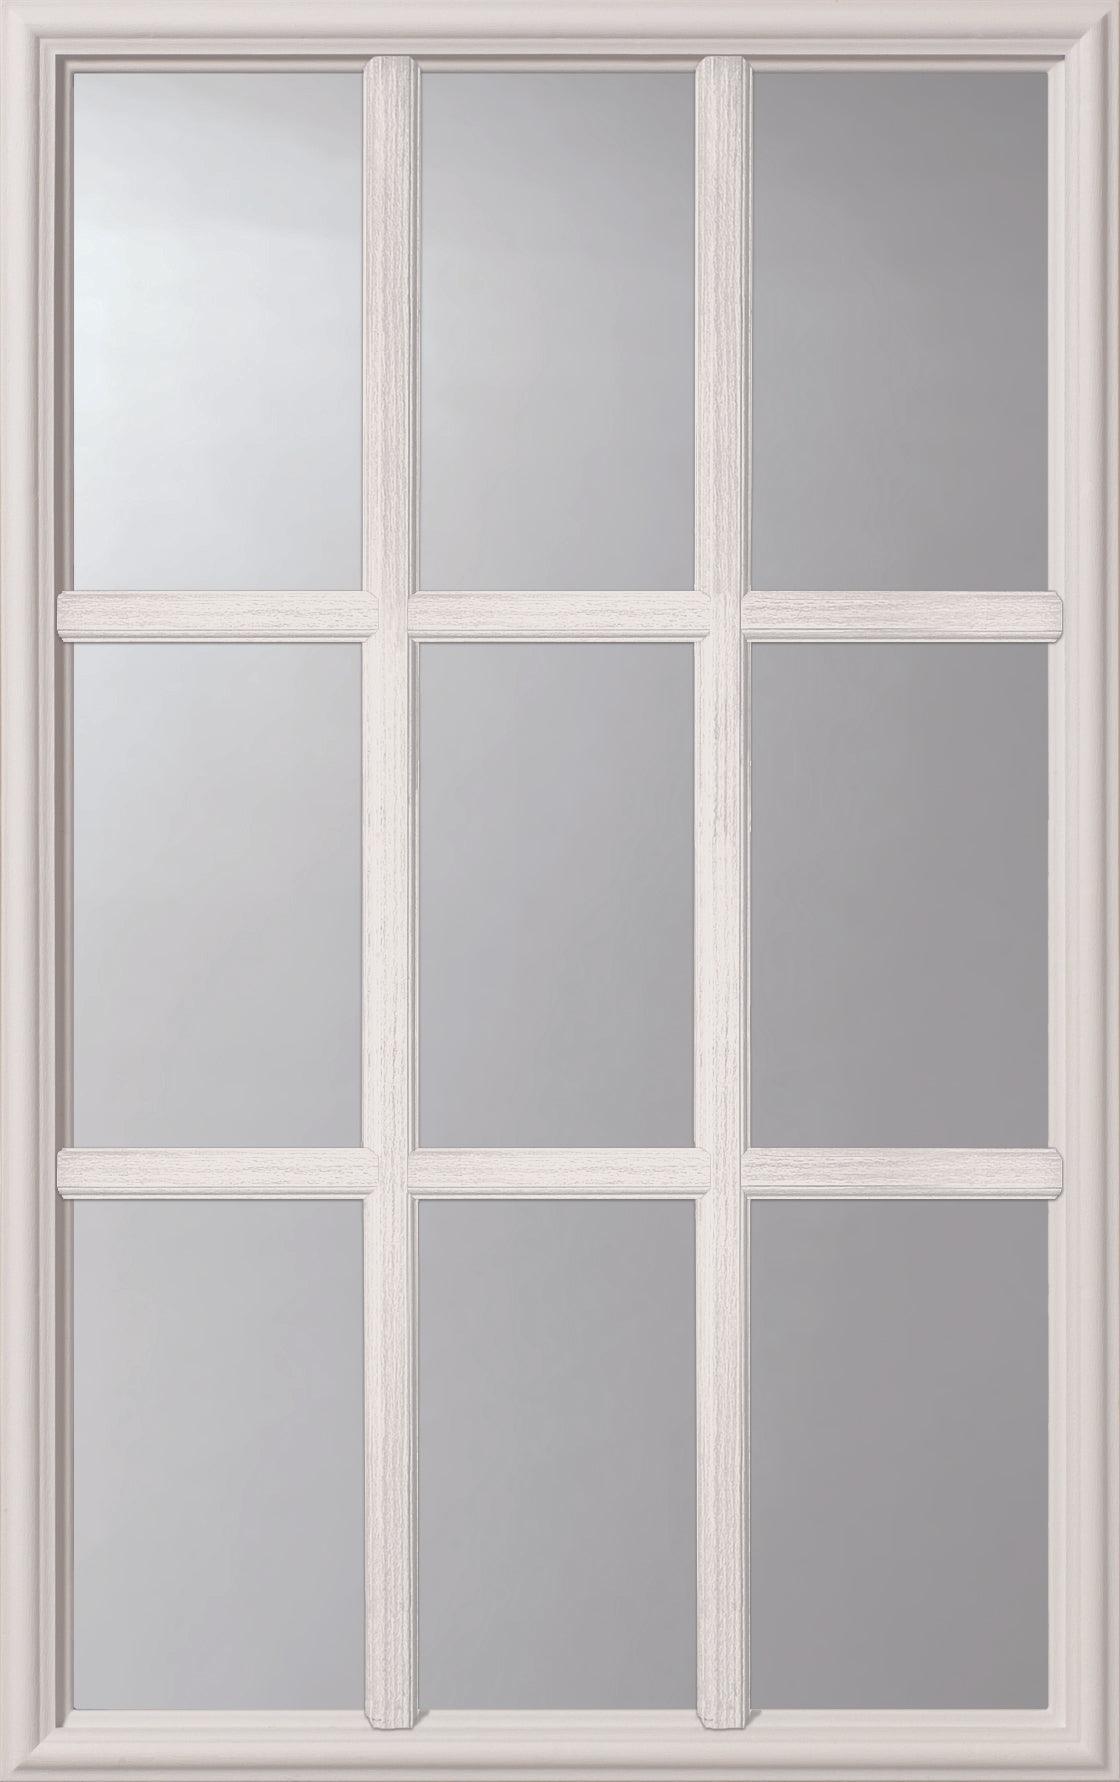 24 x 38 9 Light Replacement Frame Set for 1 Thick Door Glass (GLASS Not Included)